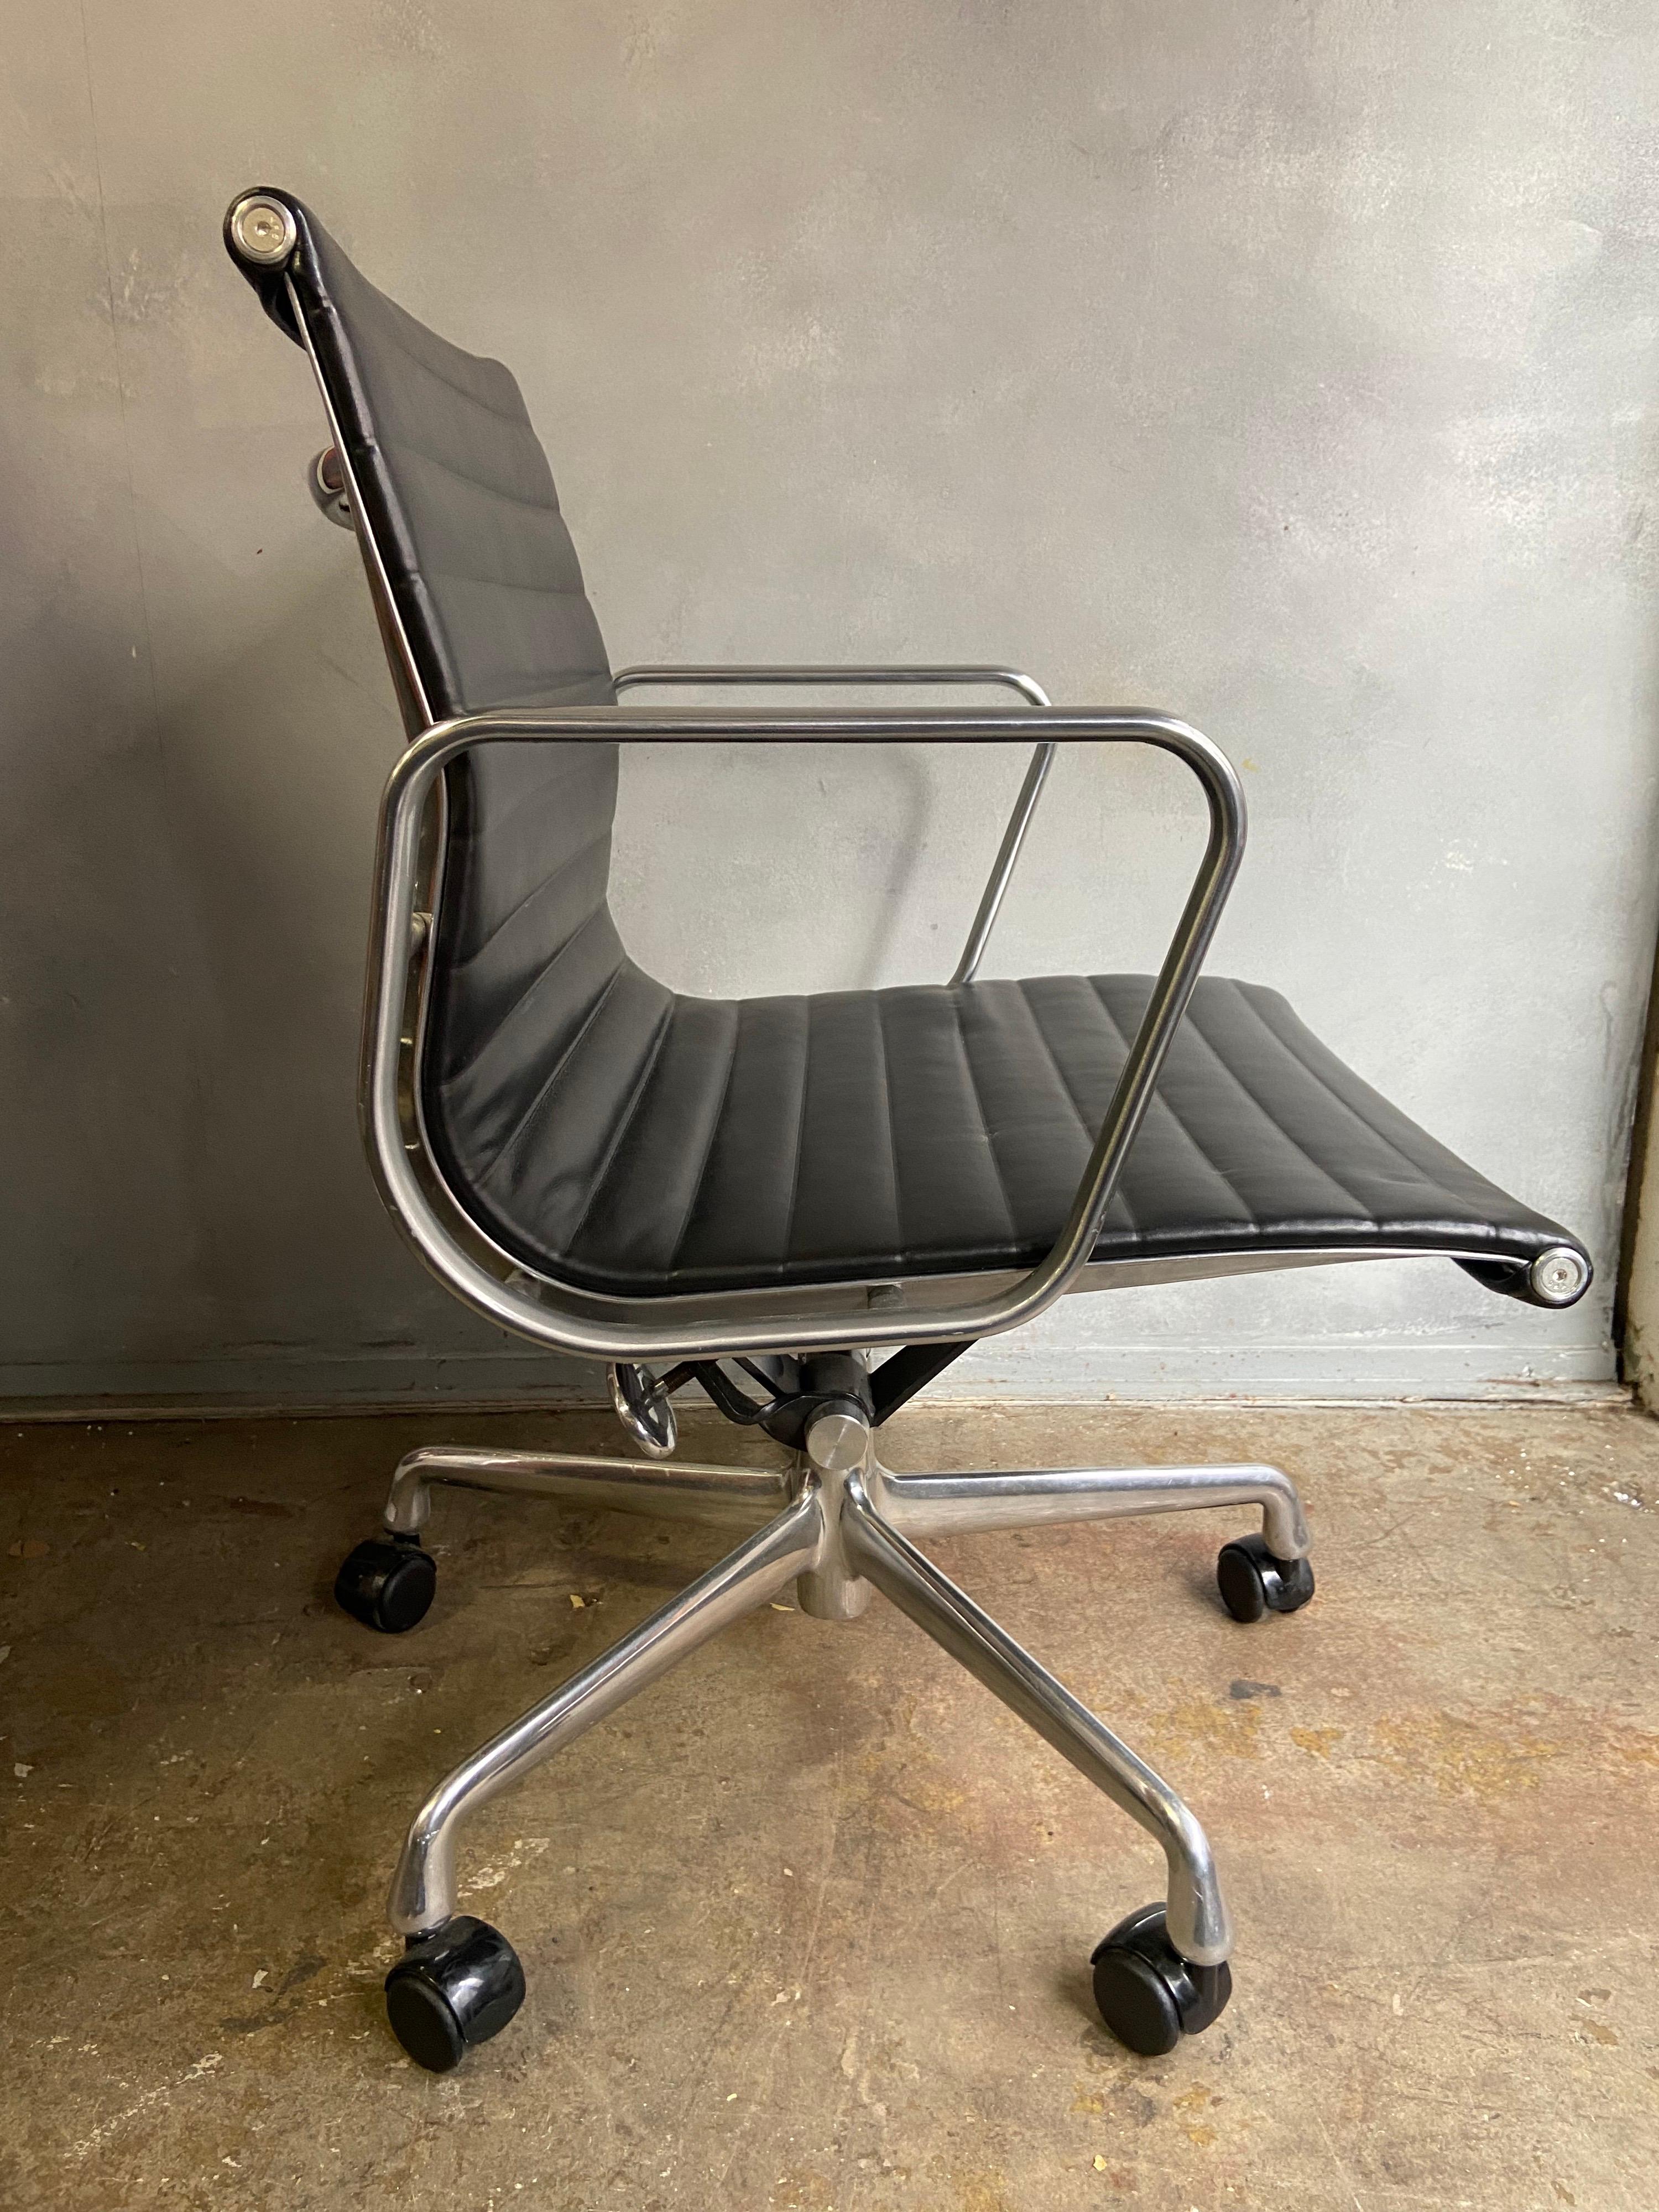 For your consideration are up to 10 aluminium group chairs in black leather designed by Eames for Herman Miller. All in very good original condition showing minimal wear. With manual tilt and height adjustment. Hard to find black metal castors that